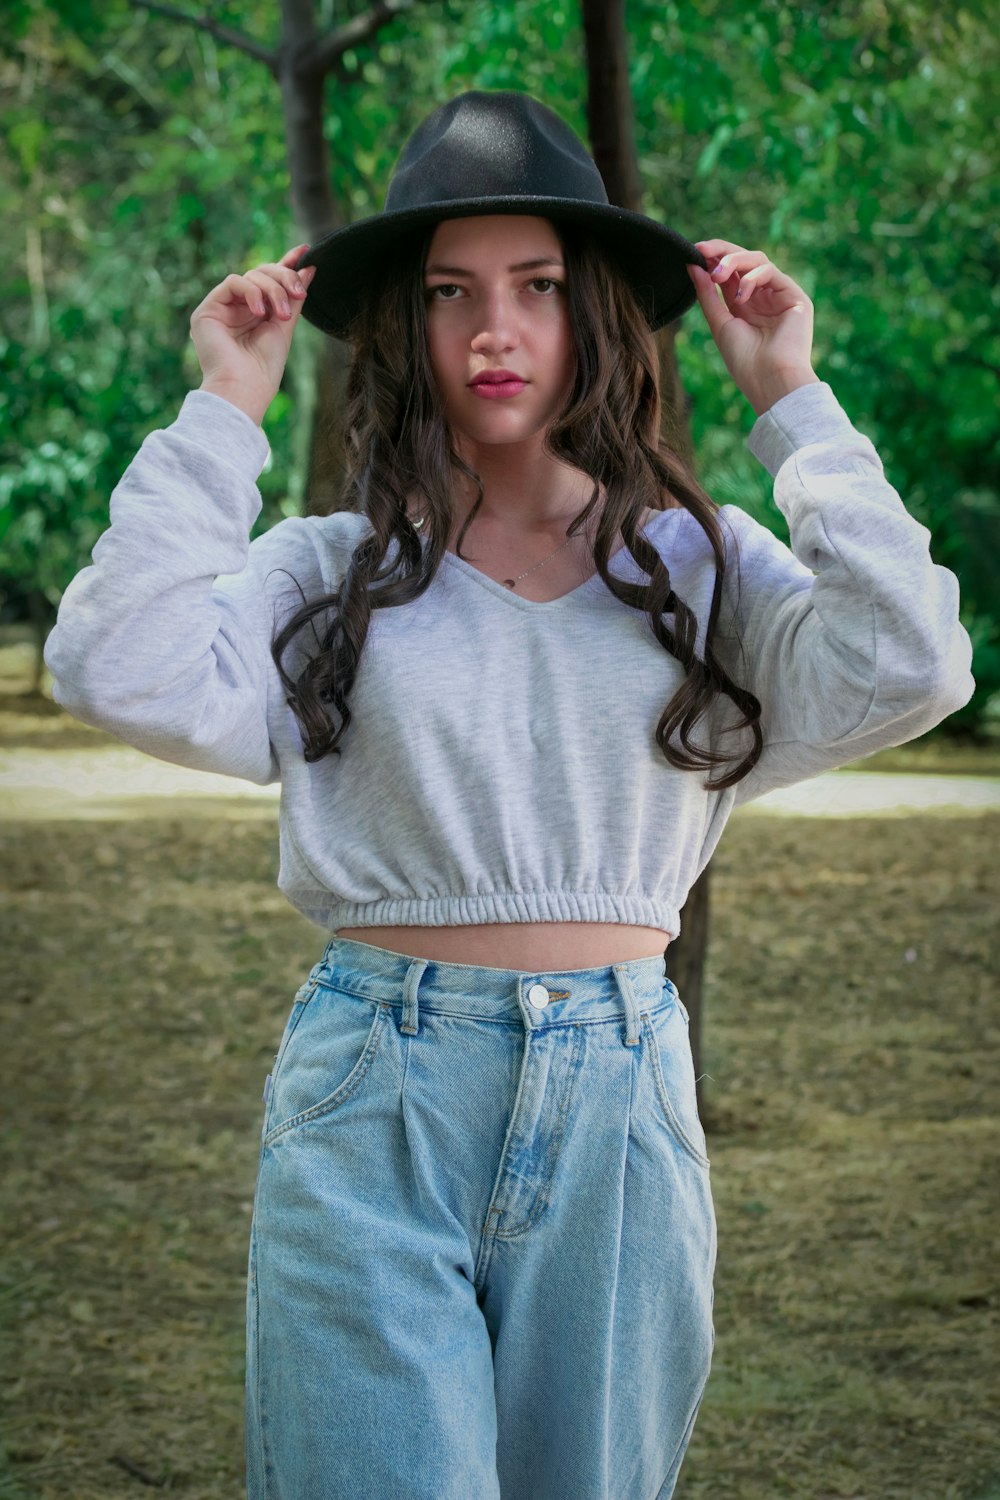 a young woman wearing a black hat and jeans